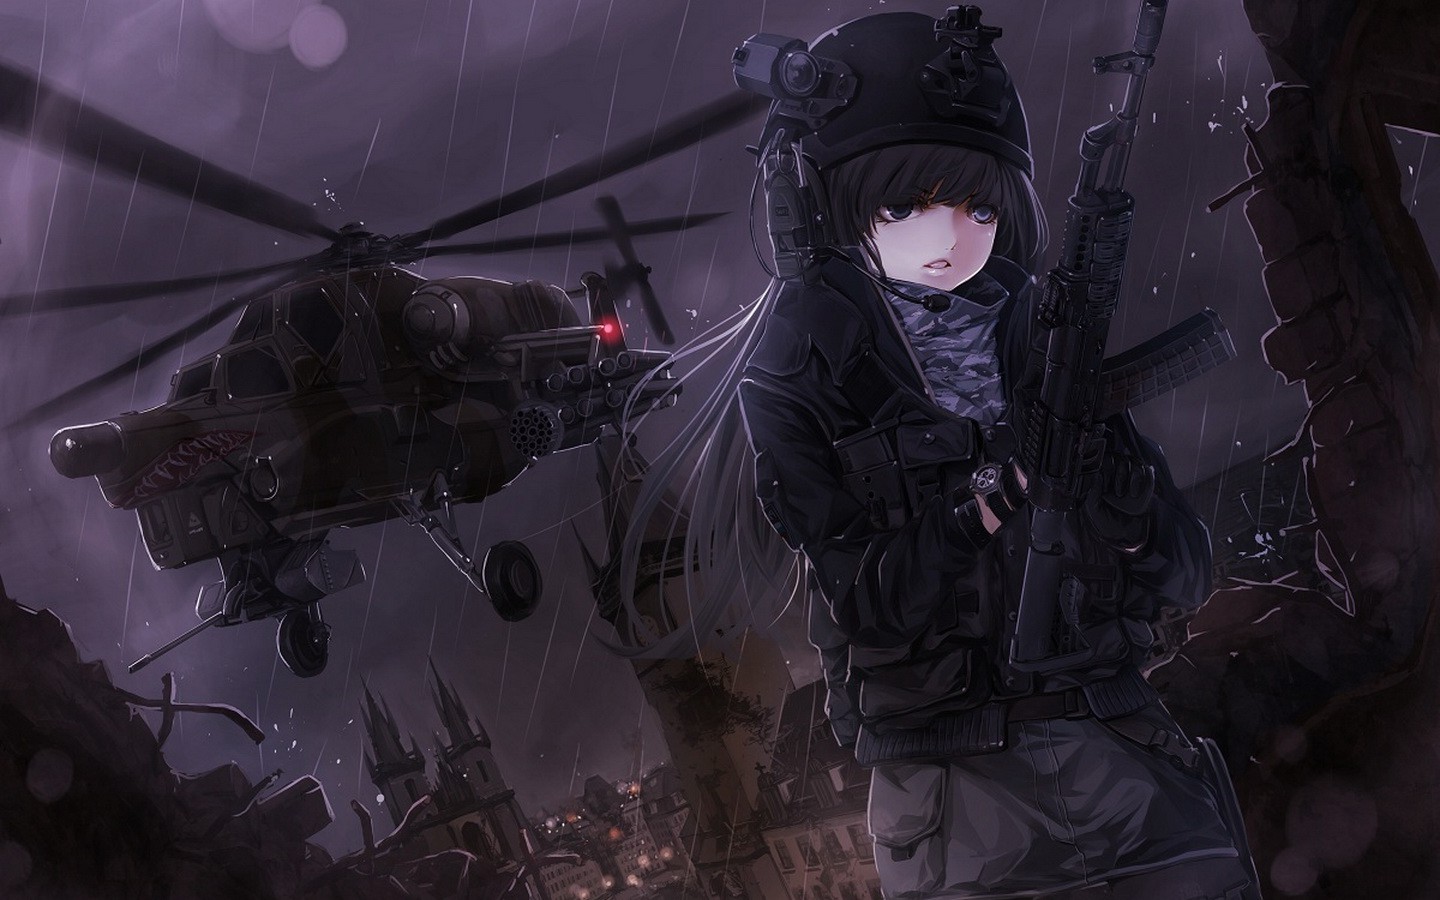  anime  Anime  Girls Gun  Helicopters Wallpapers  HD  